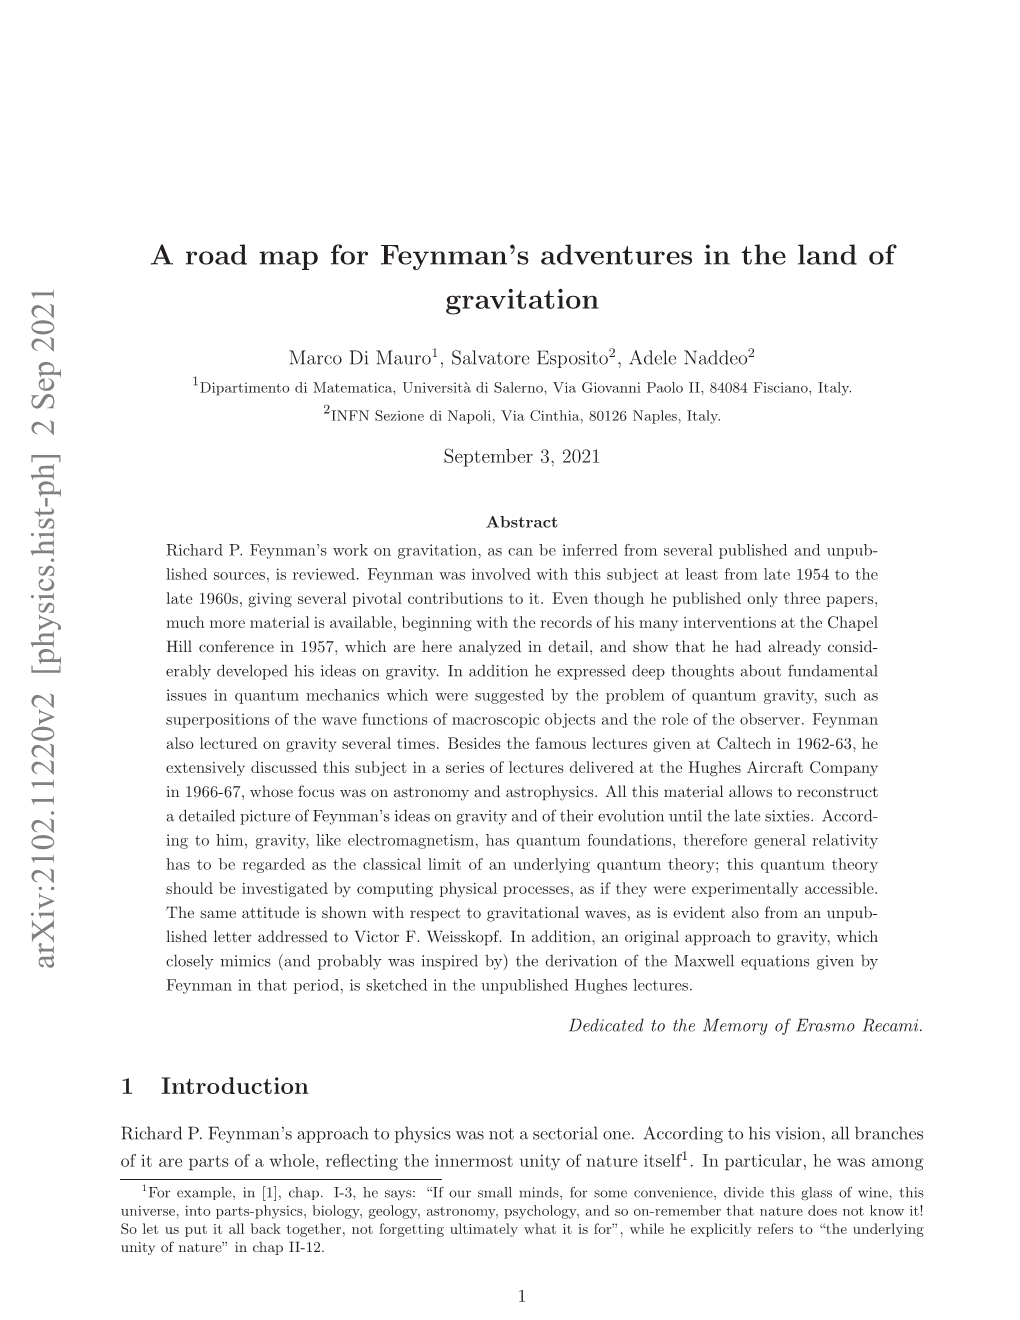 A Roadmap for Feynman's Adventures in the Land of Gravitation